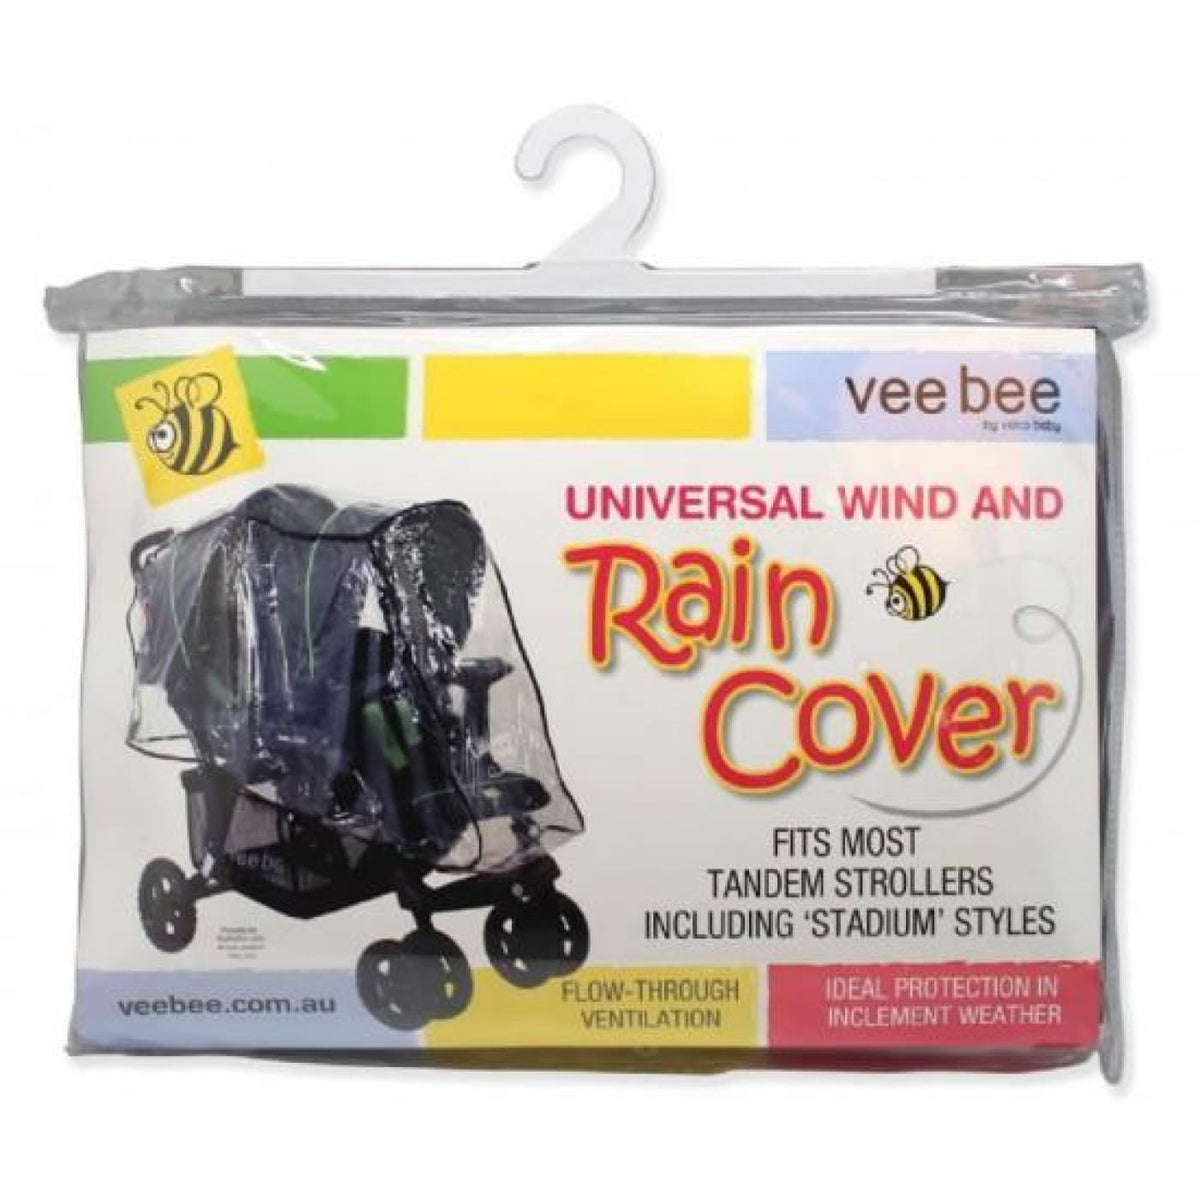 Veebee Raincover Tandem with Dual Hoods - PRAMS &amp; STROLLERS - SUN COVERS/WEATHER SHIELDS